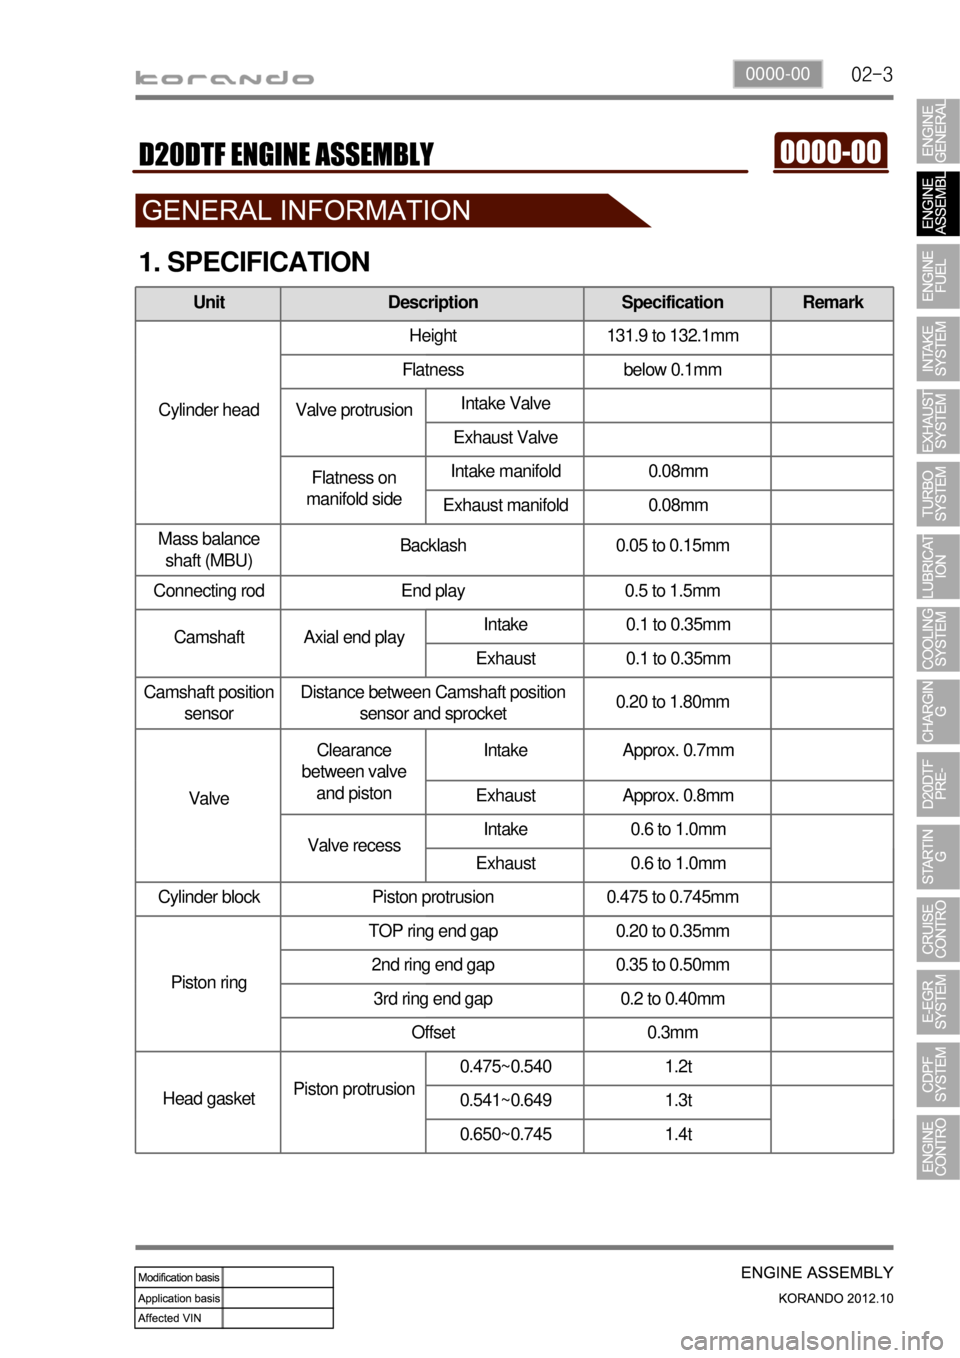 SSANGYONG KORANDO 2012  Service Manual 02-30000-00
Unit Description Specification Remark
Cylinder head Height 131.9 to 132.1mm
Flatness below 0.1mm
Valve protrusion Intake Valve 0.1~0.7mm
Exhaust Valve 0.1~0.7mm
Flatness on 
manifold sideI